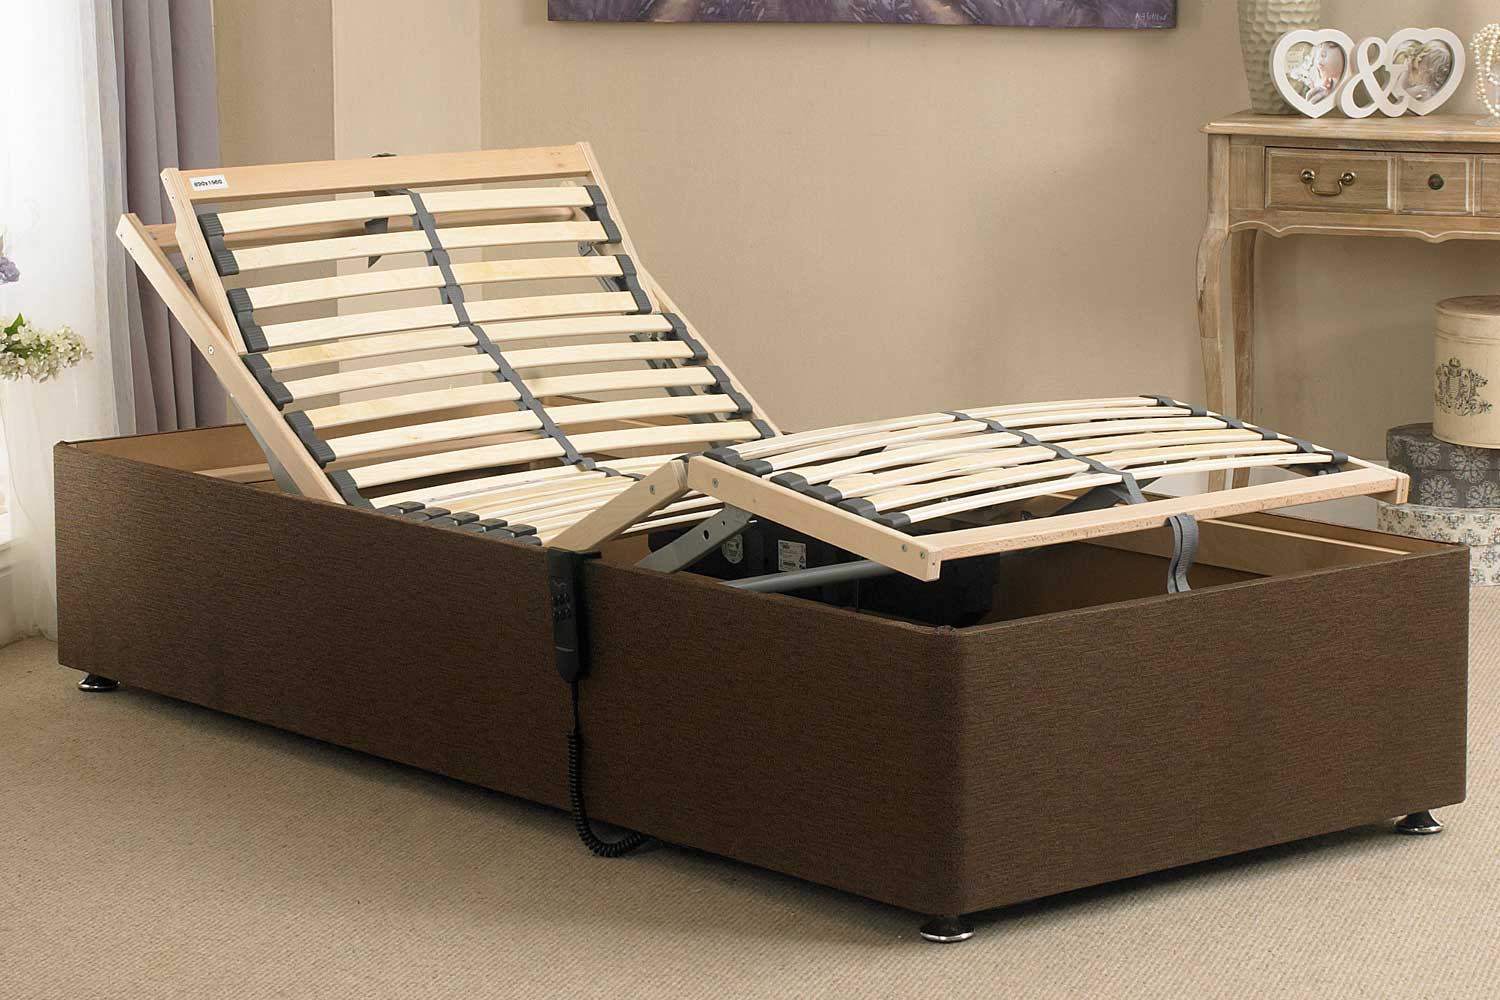 How to Choose the Right Adjustable Bed Frame for Your Needs?